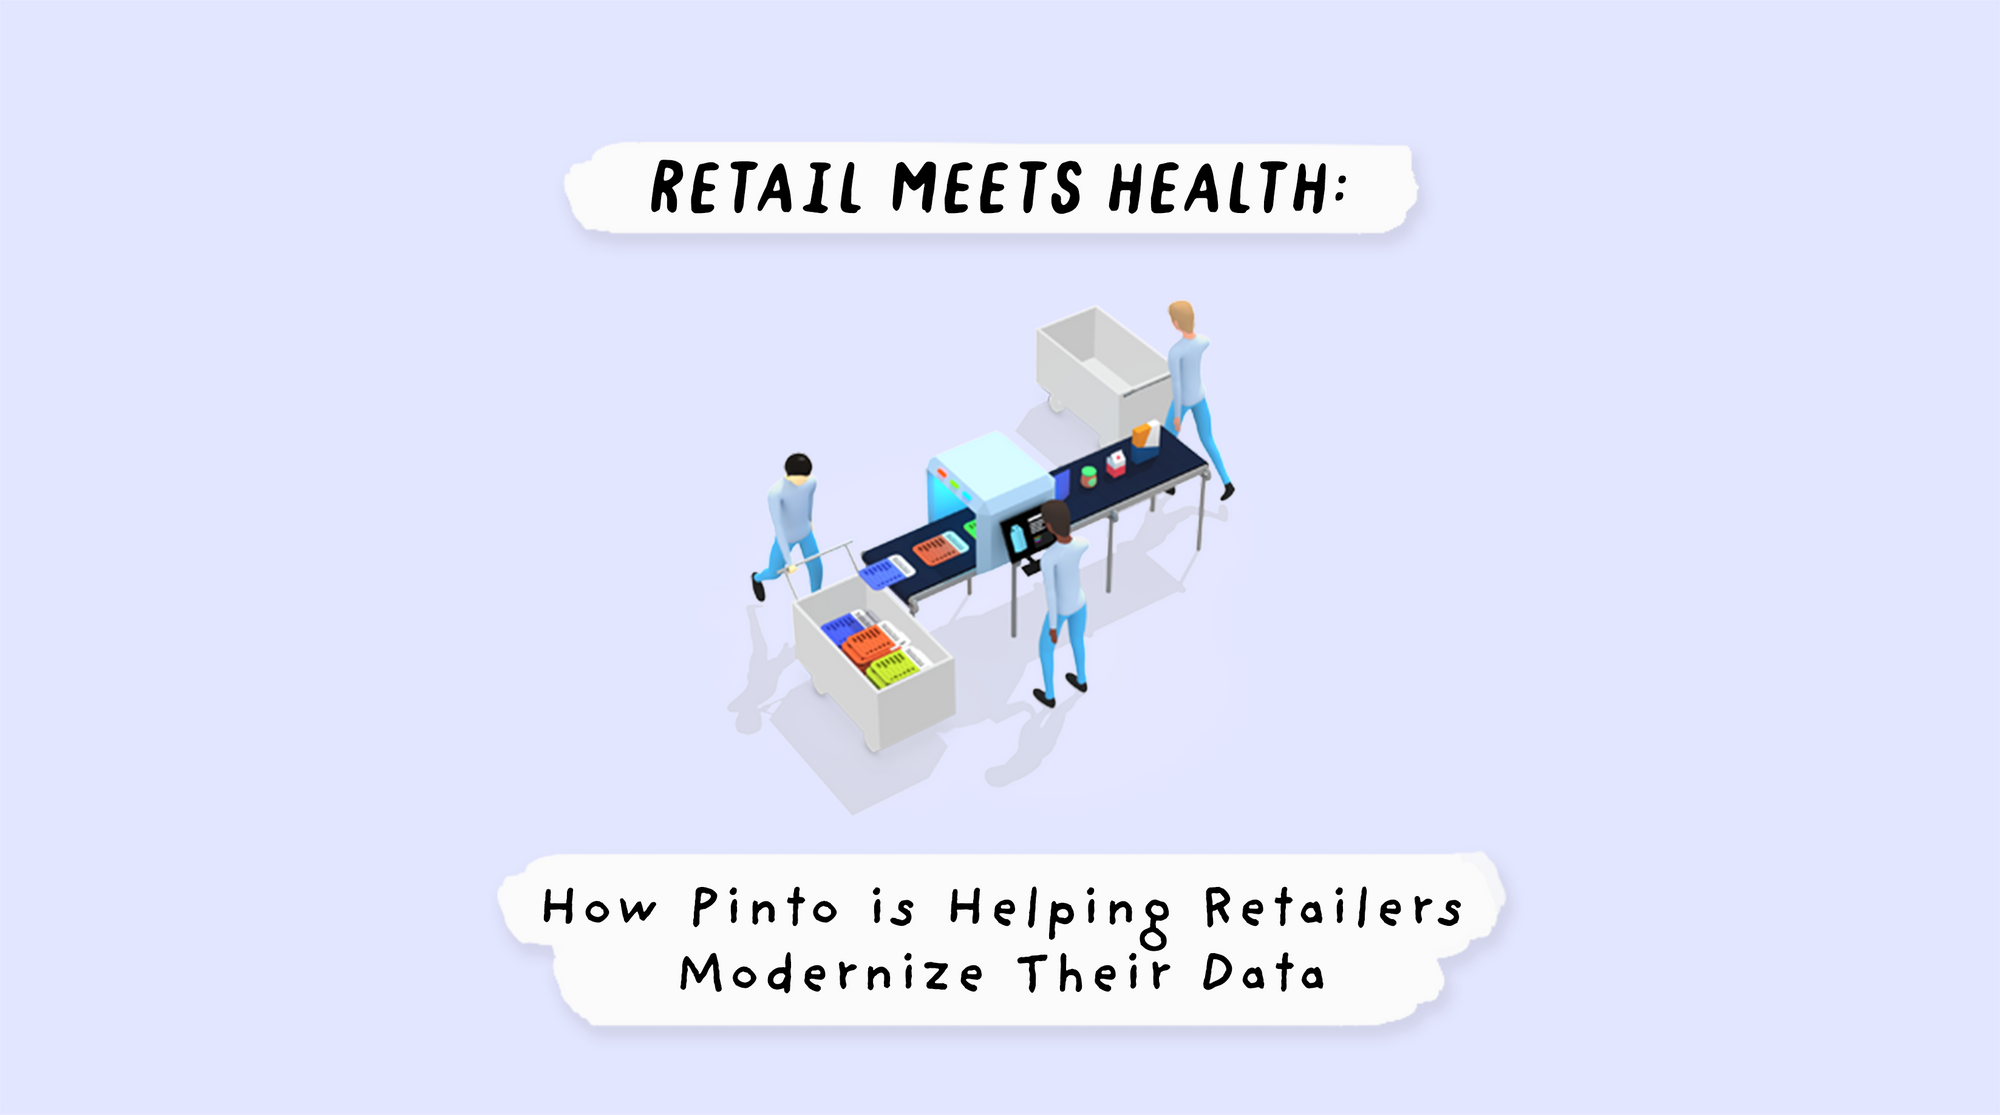 Retail Data Health: How Pinto is Helping Retailers Modernize Their Data